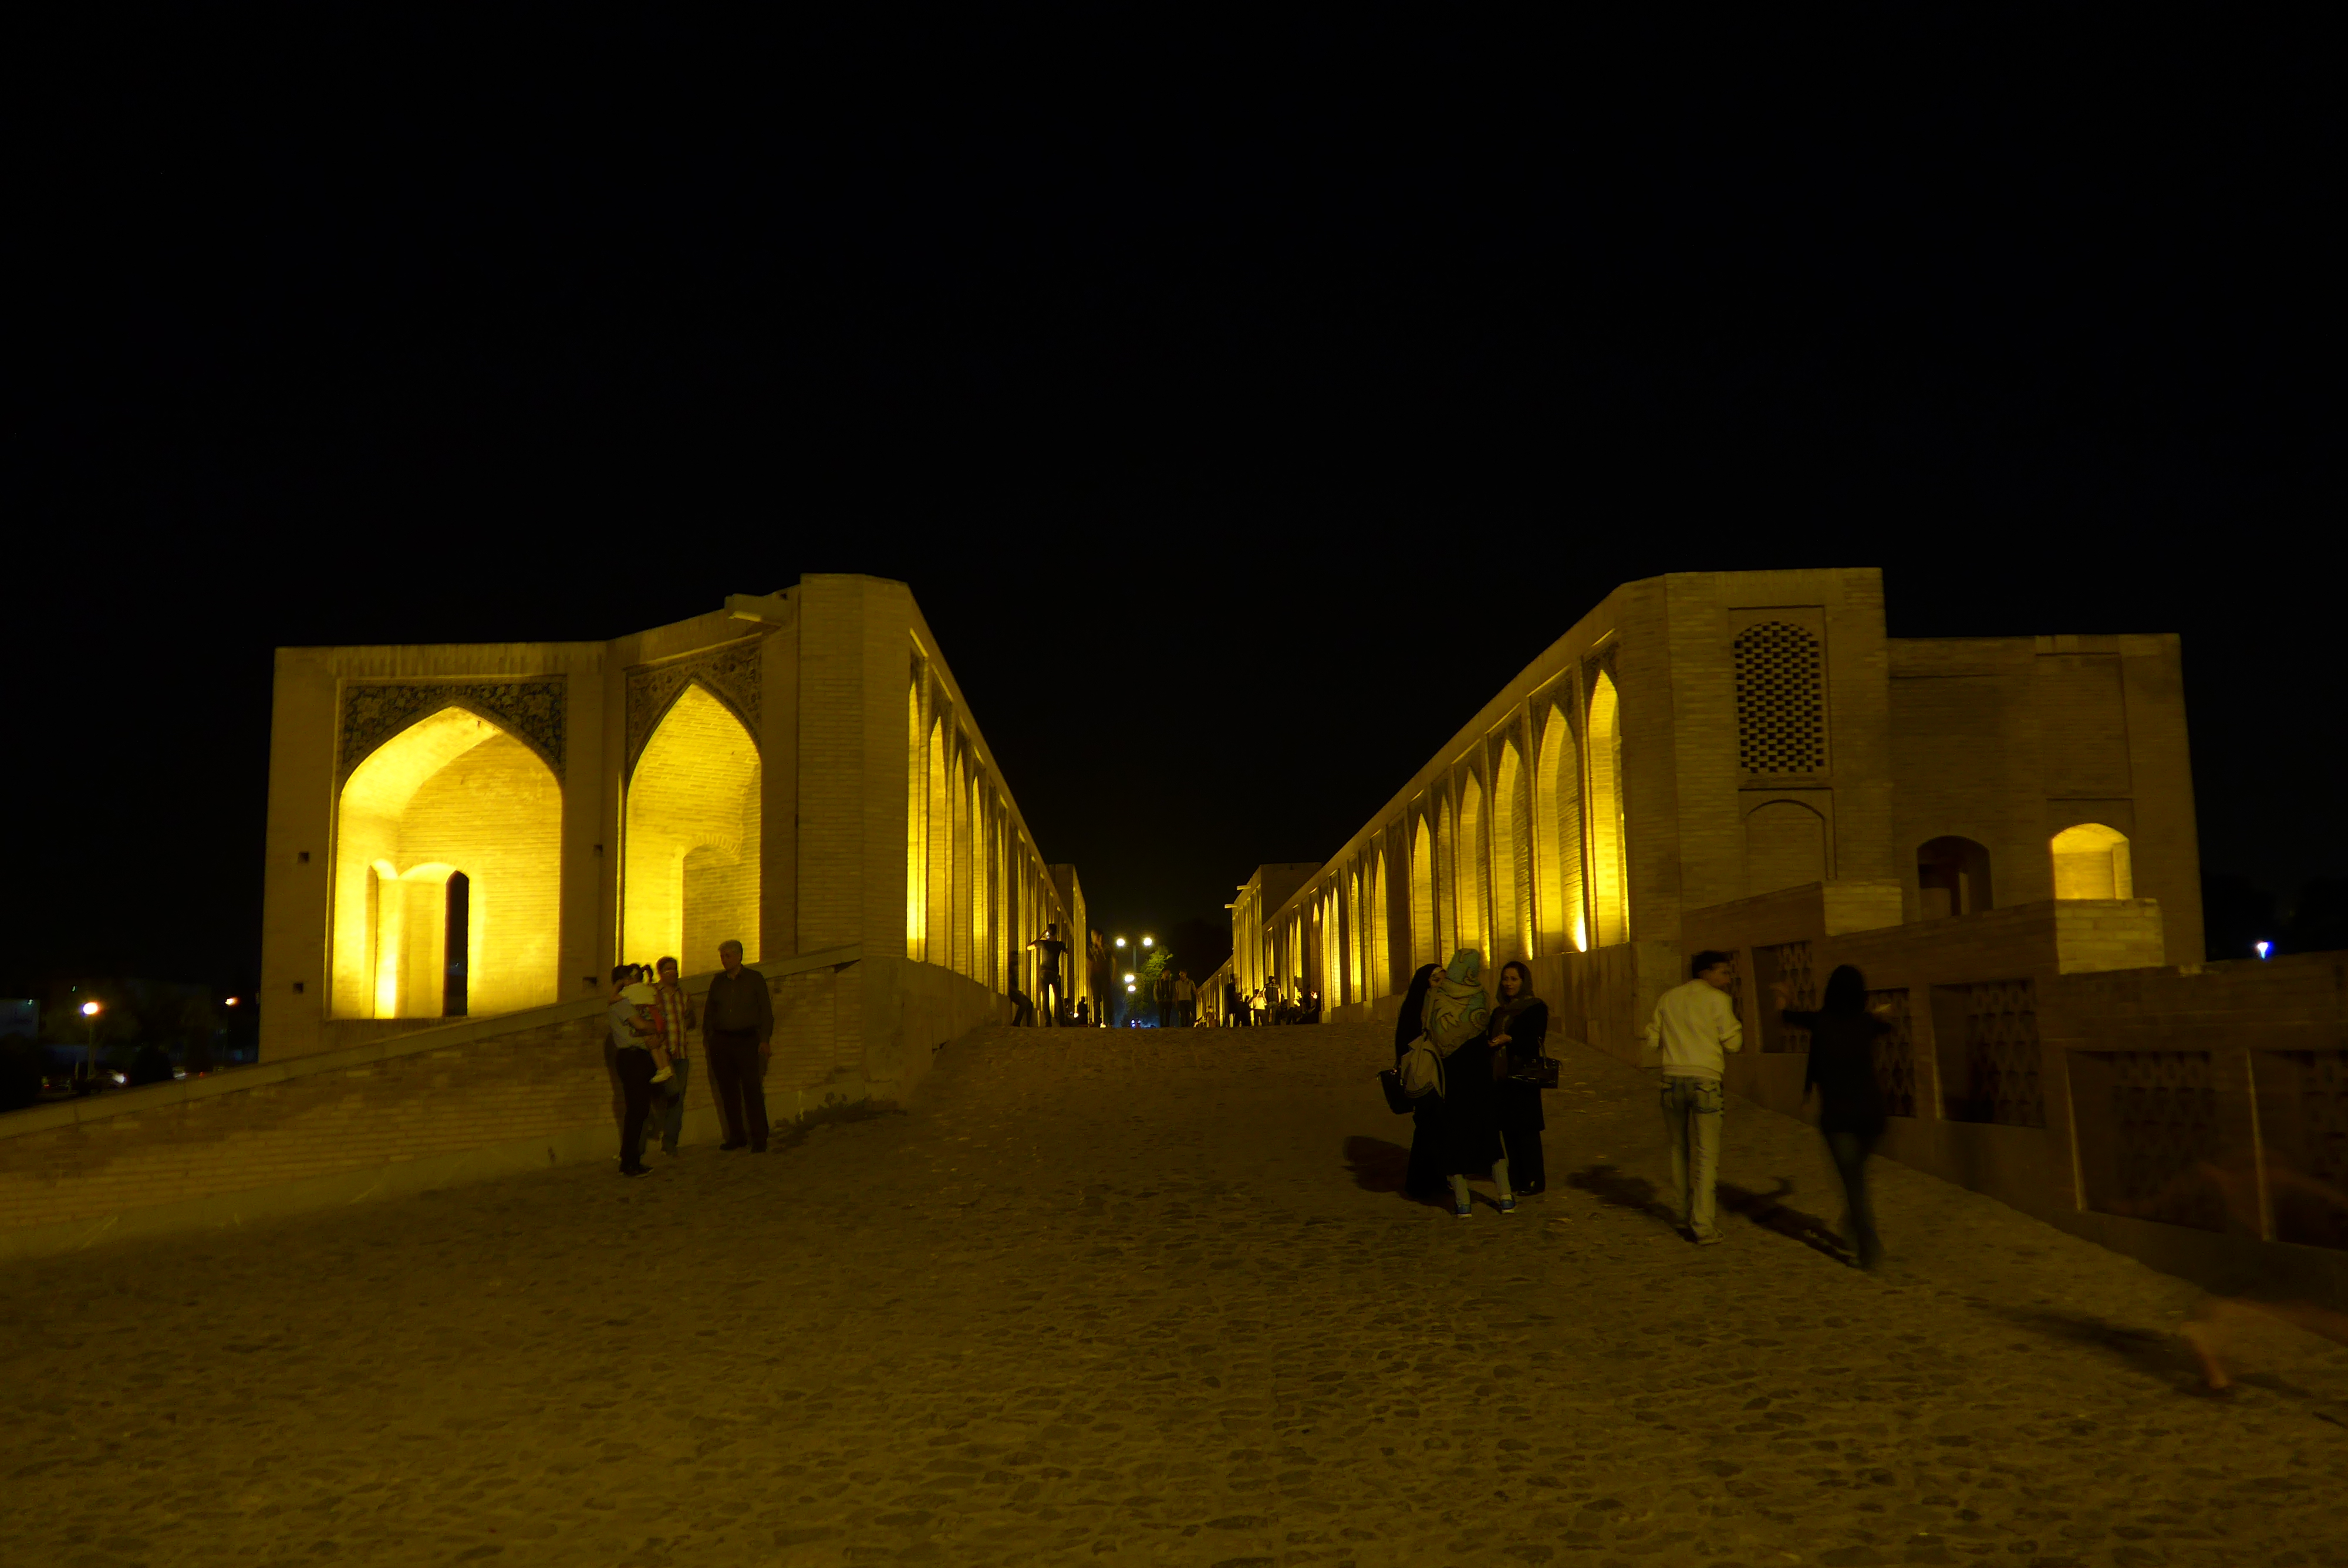 The bridges of Esfahan are just incredibly beautiful. Especially if you couchsurfing host takes you there at night to listen to locals singing in the arches. 